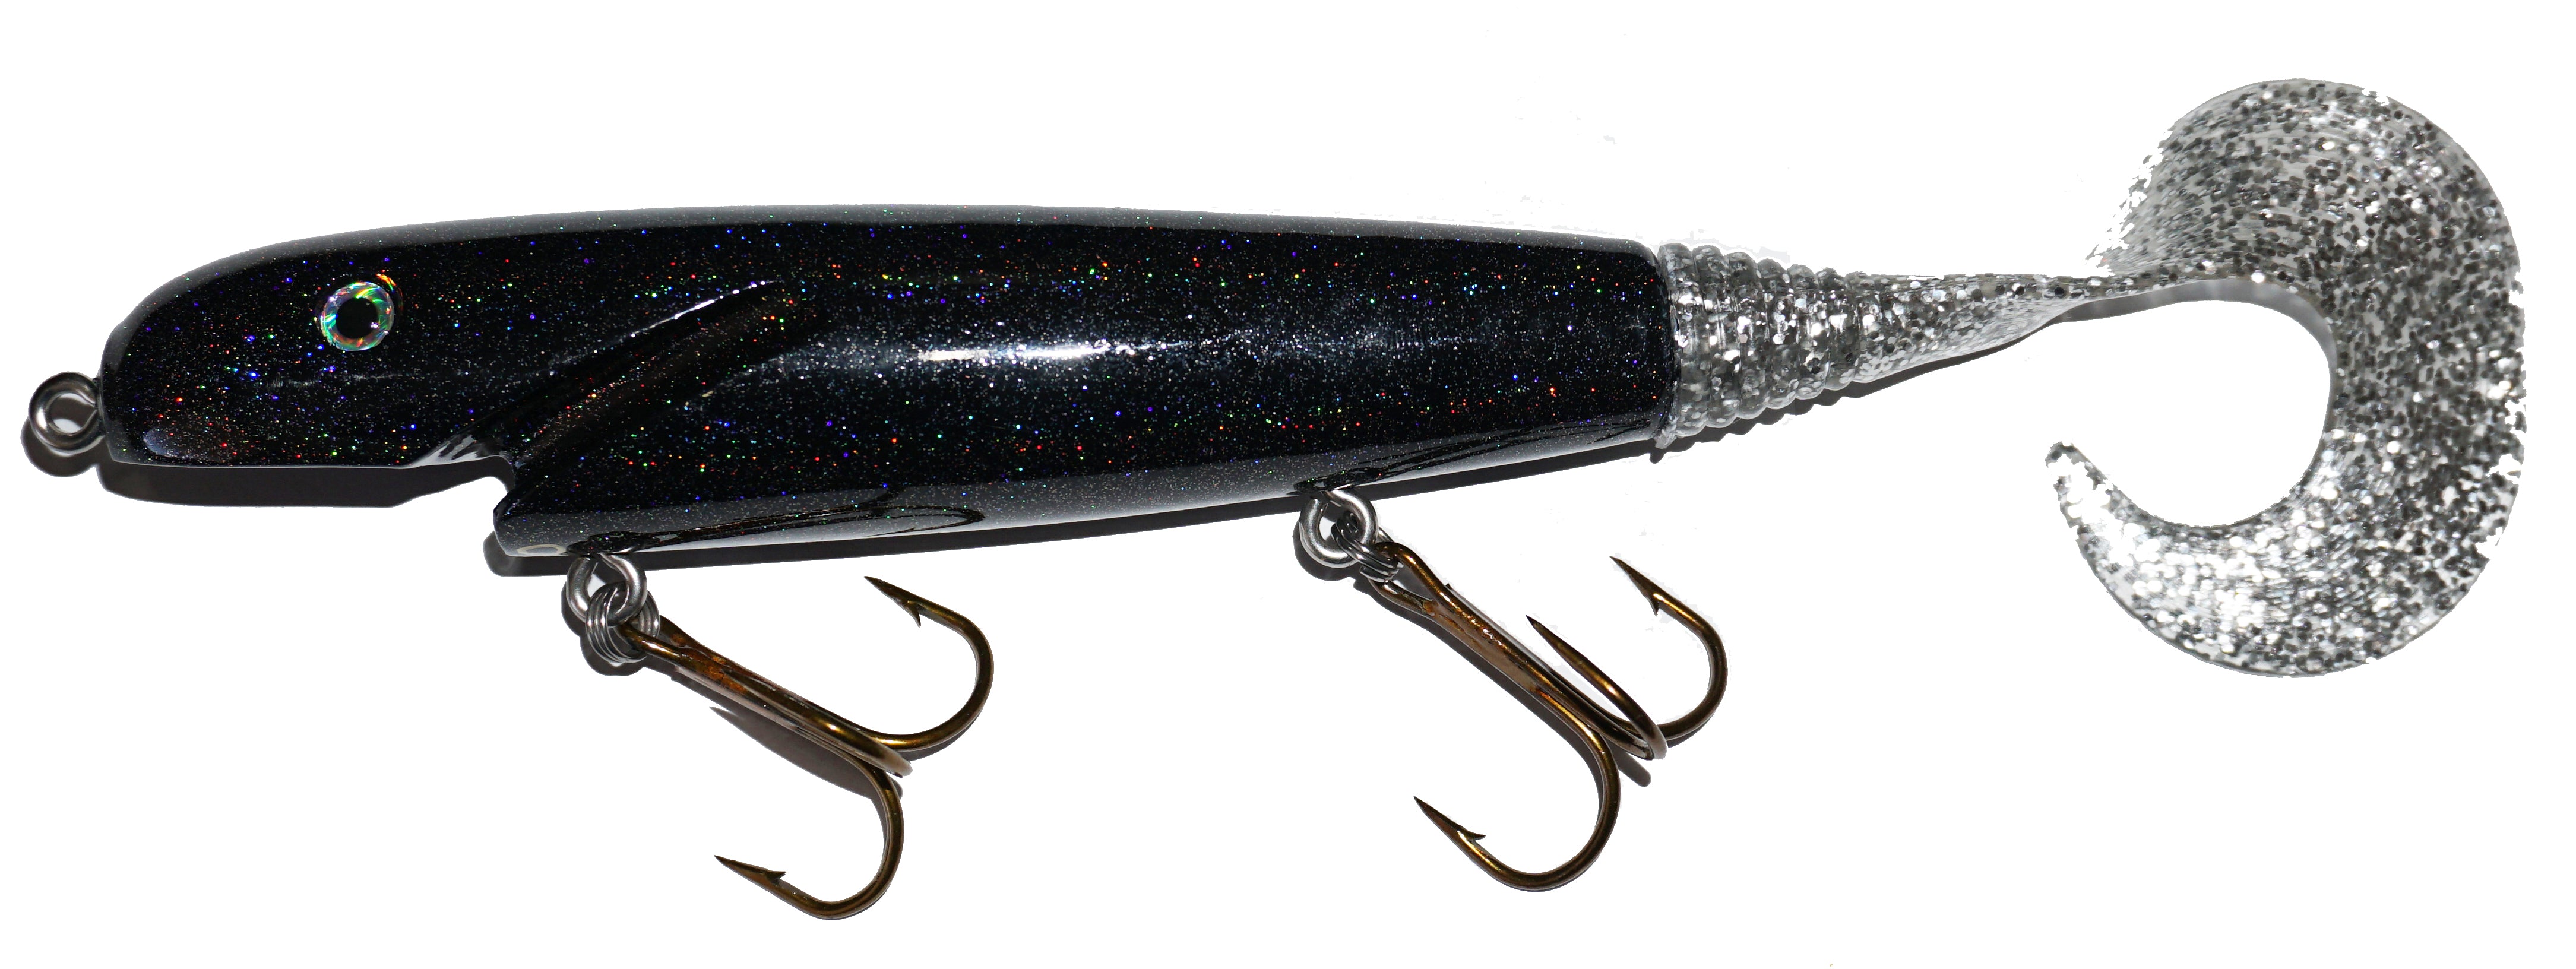 Leo Lures 6 Jerkbait Rubber Tail Gizzard Shad